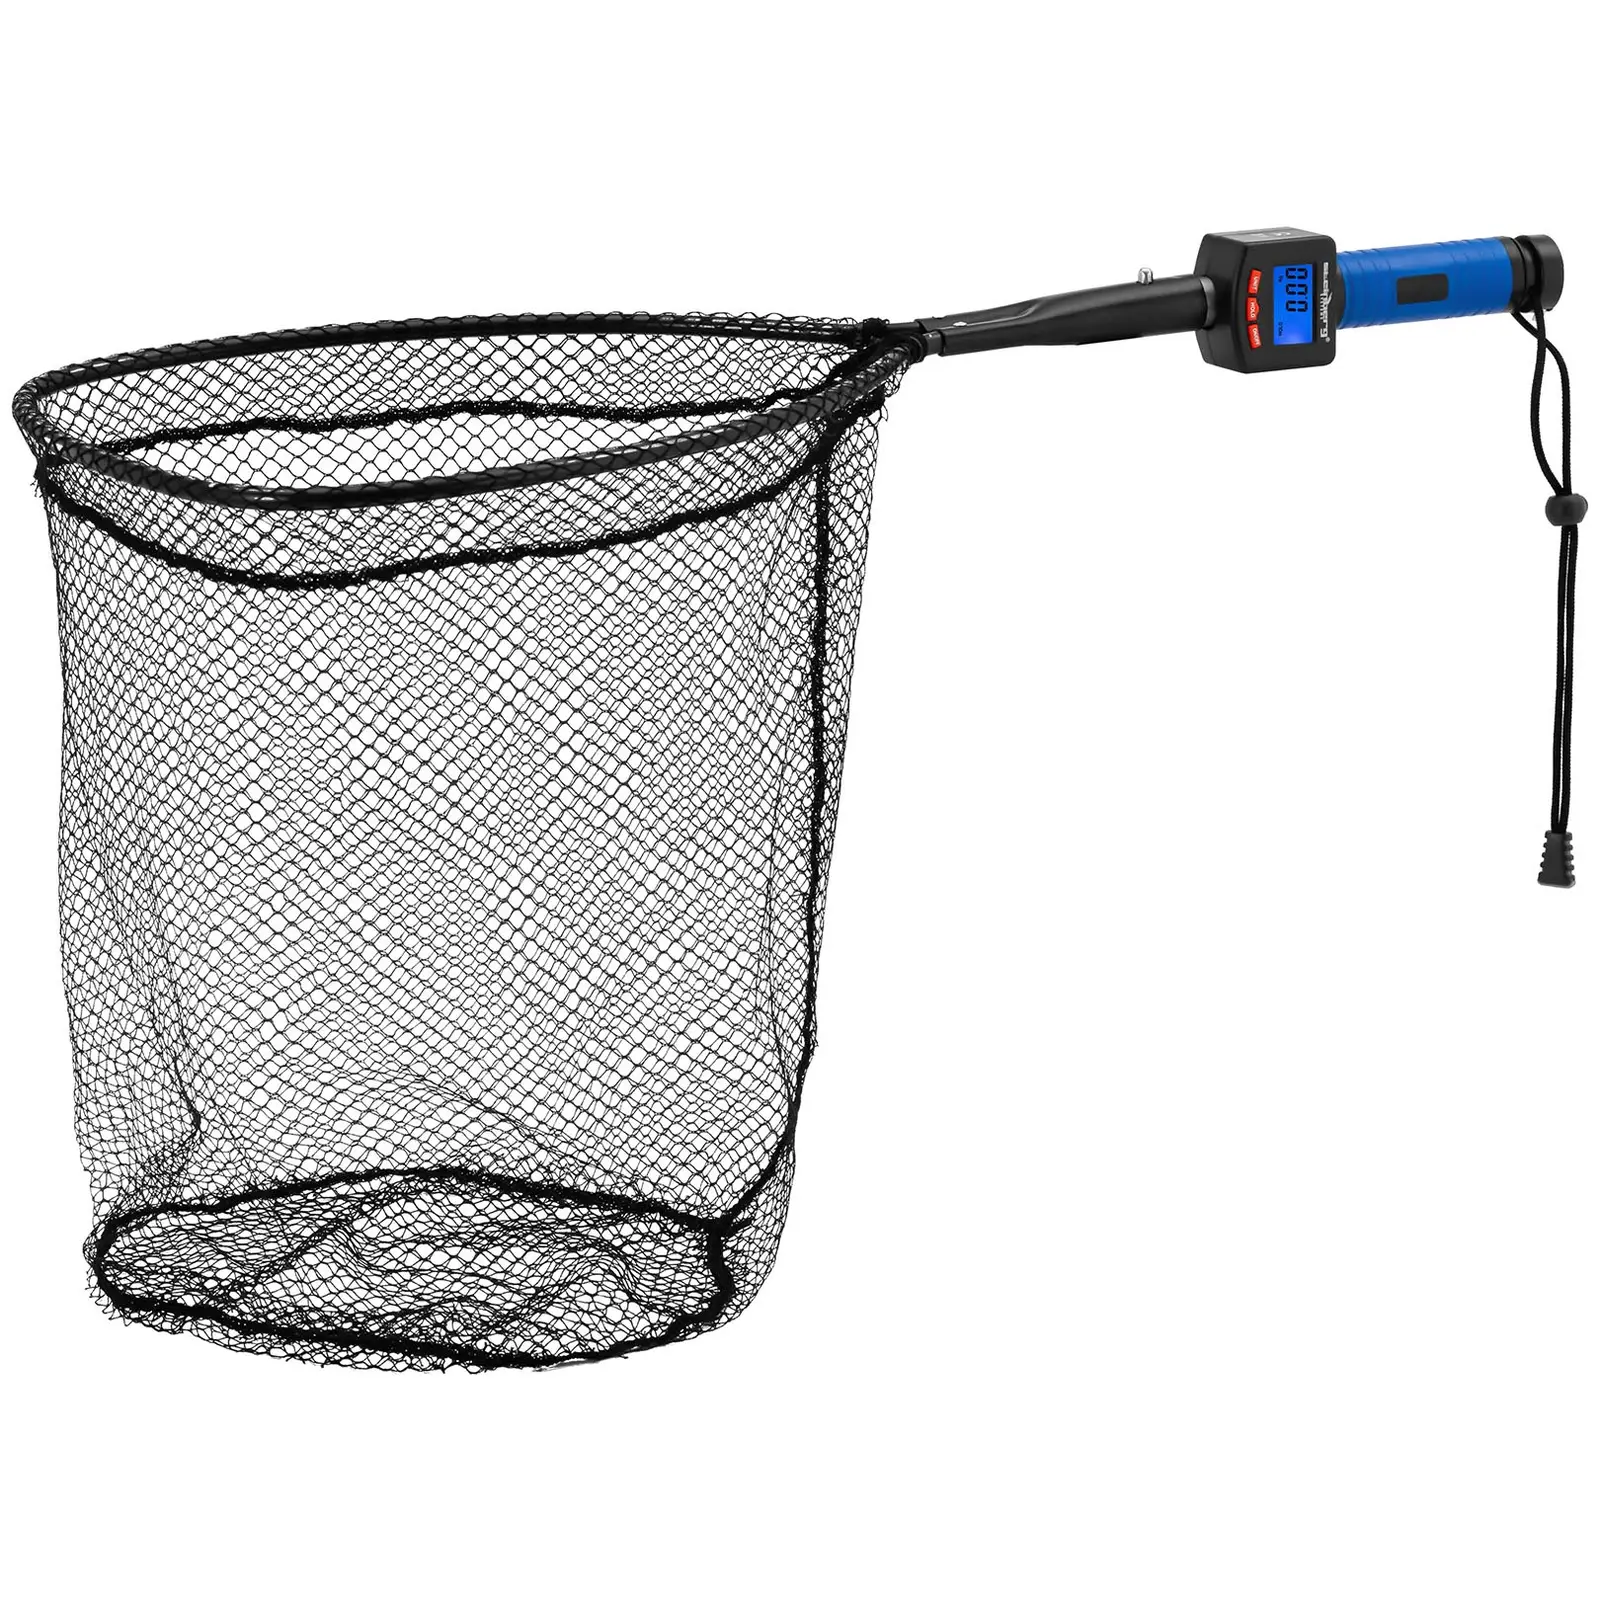 Fishing Net Scale - Foldable LCD 30 cm Up To 25 kg kg / LB / oz